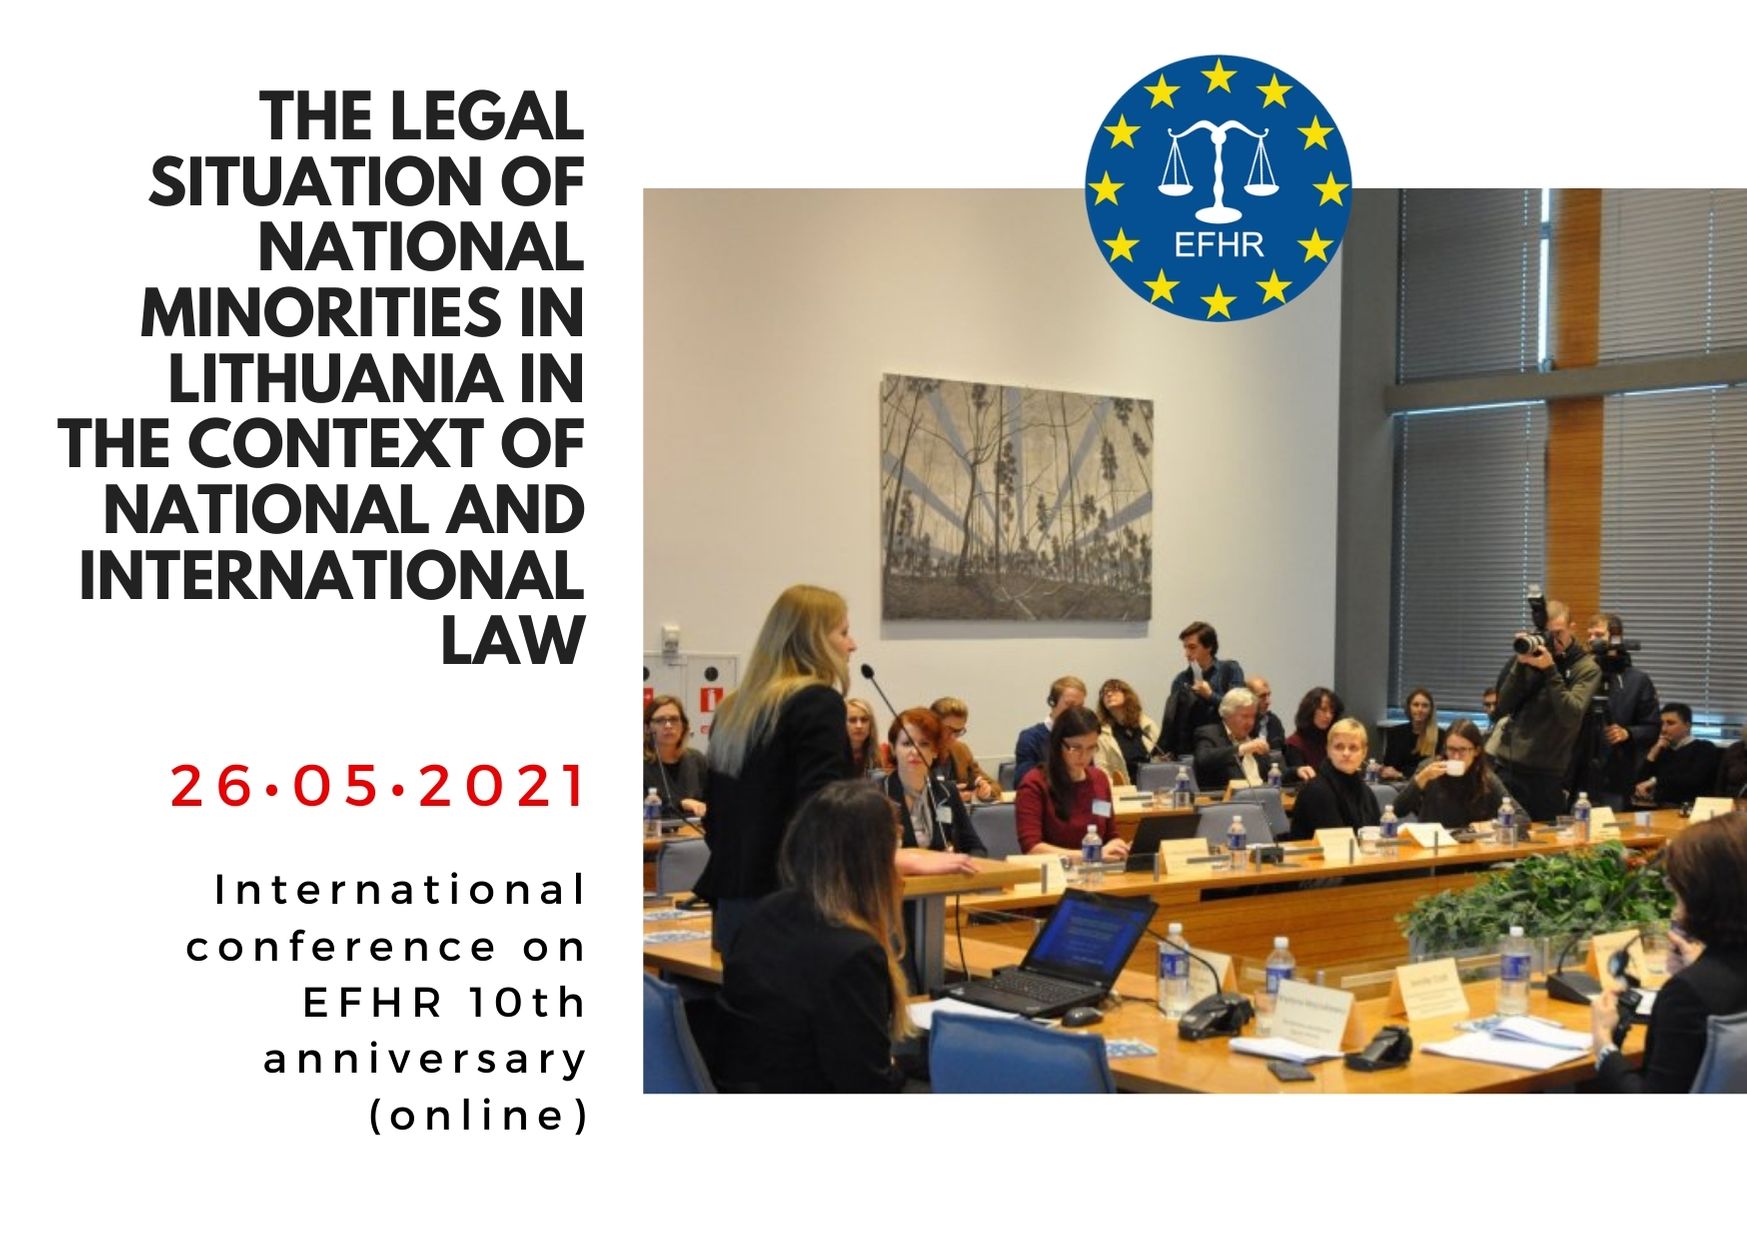 International online conference on national minority rights in Lithuania on May 26